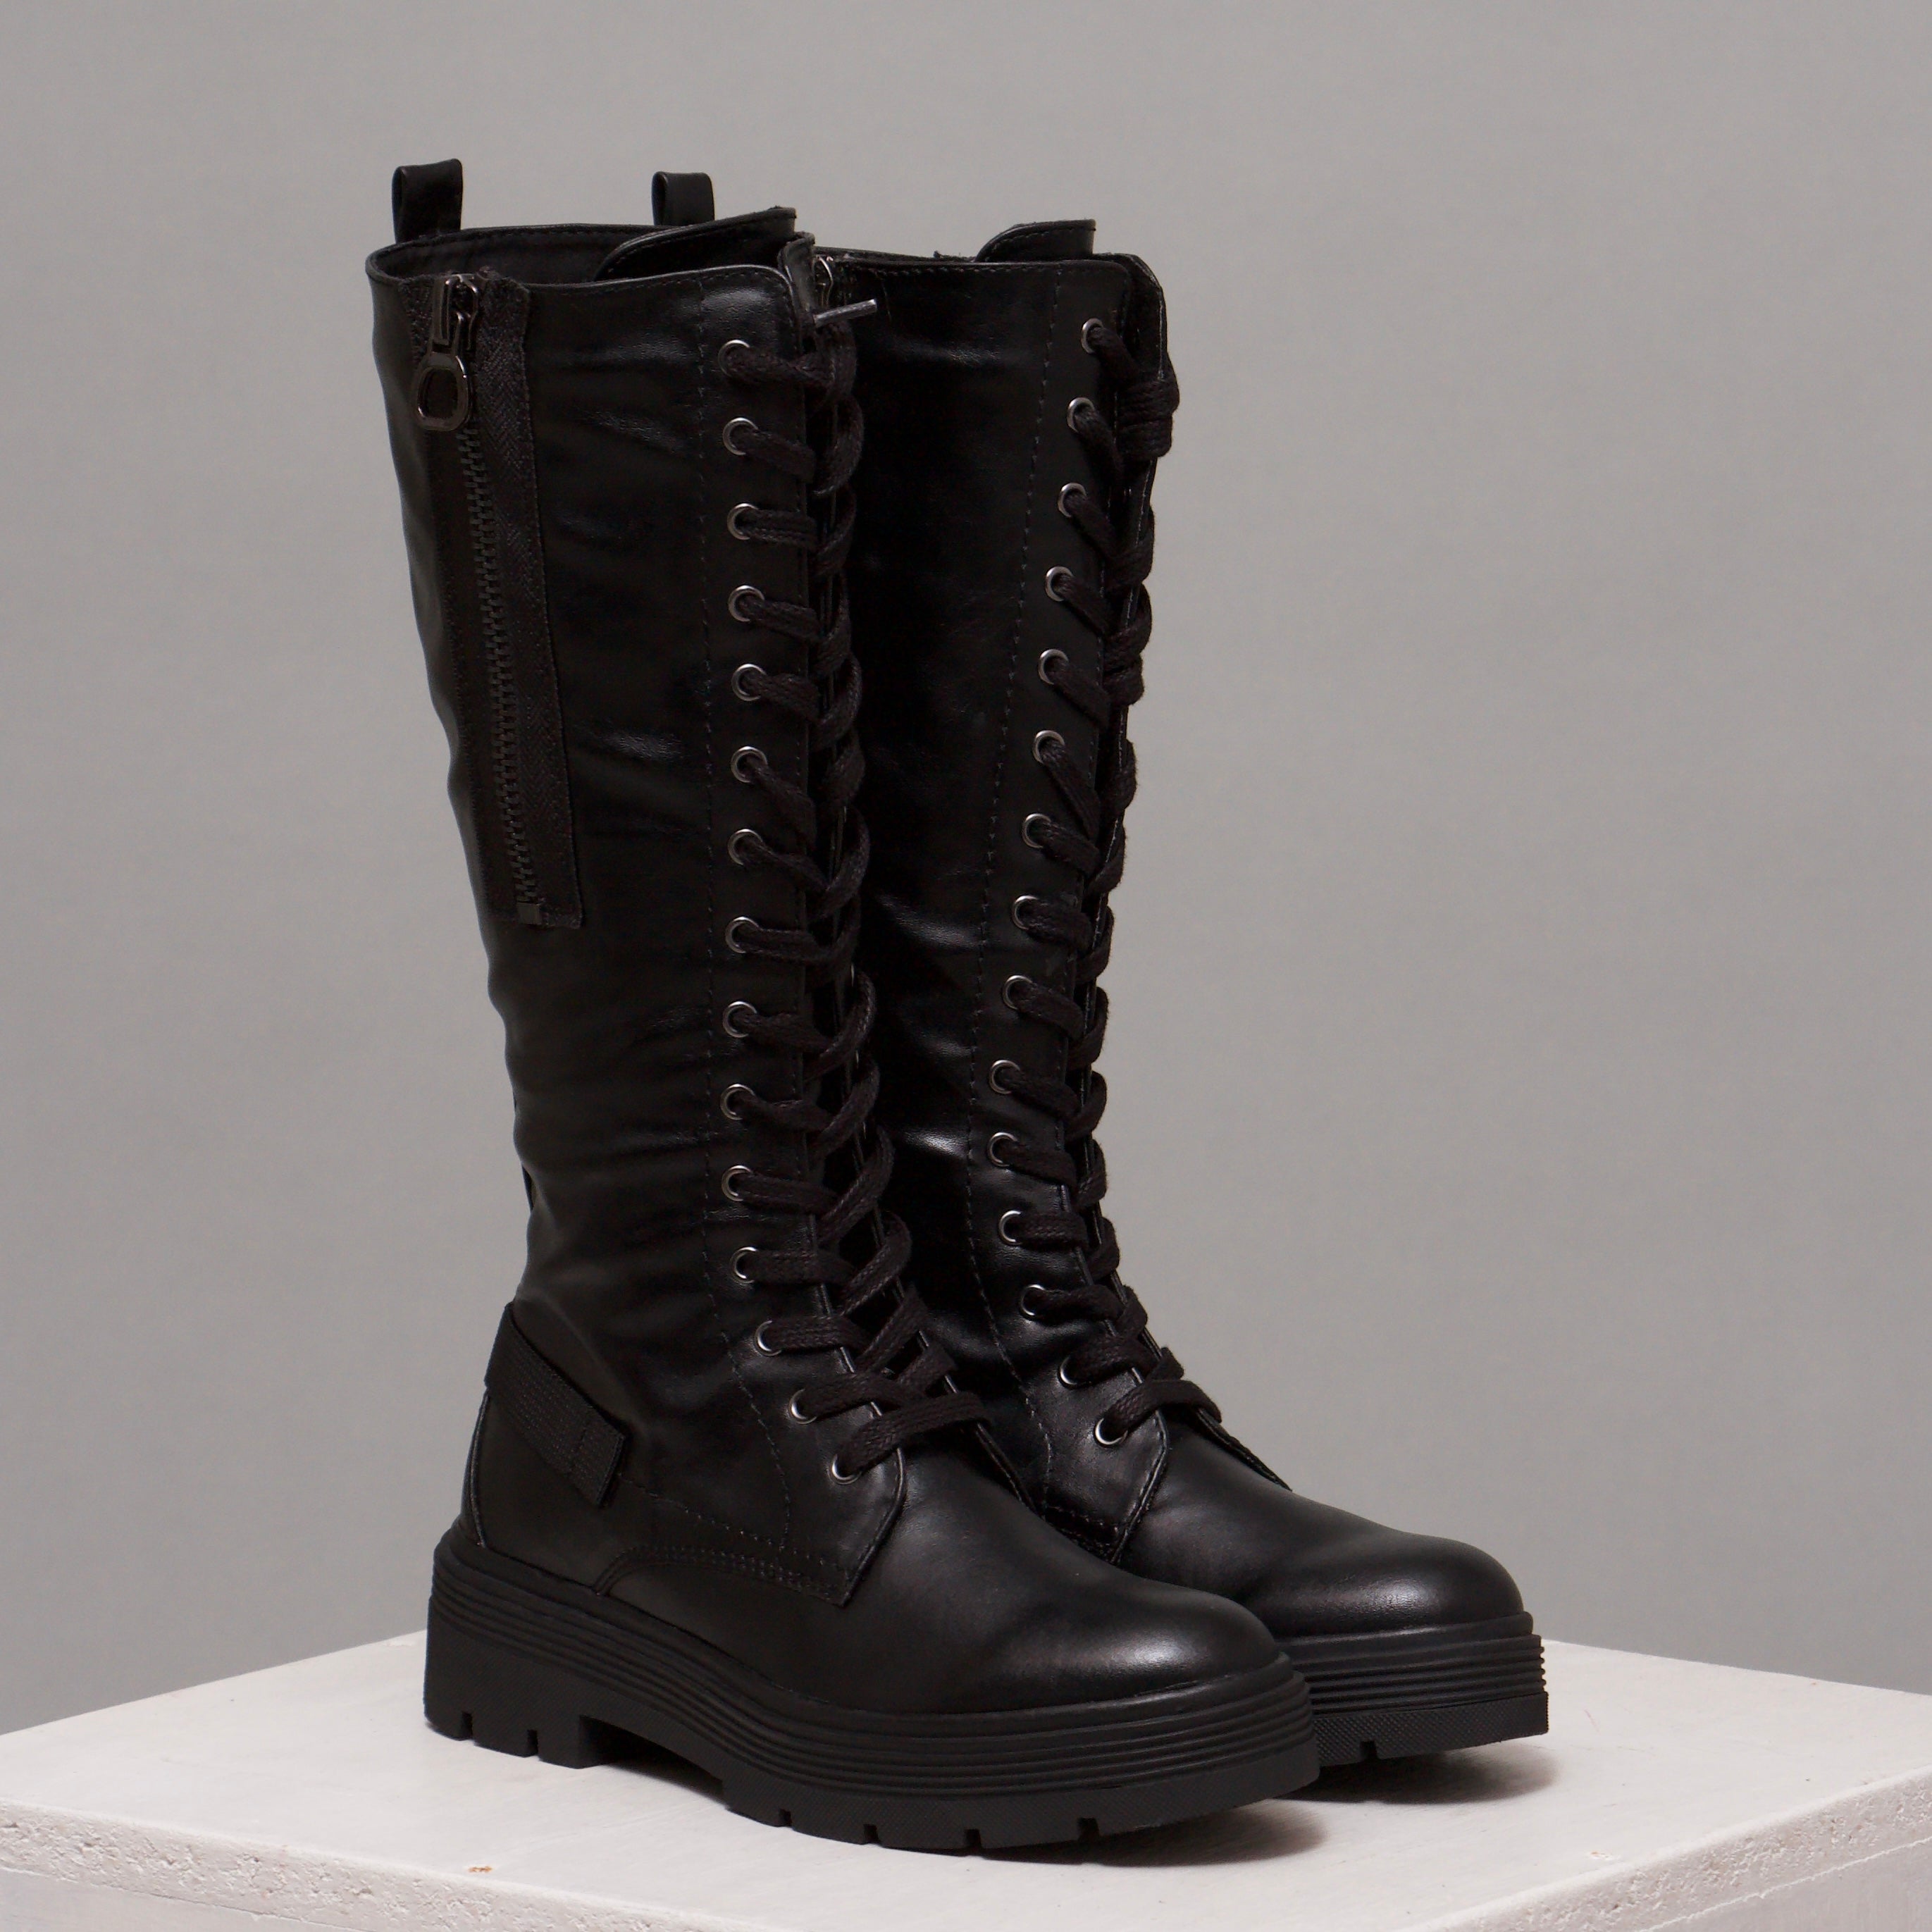 Long winter lace up boots